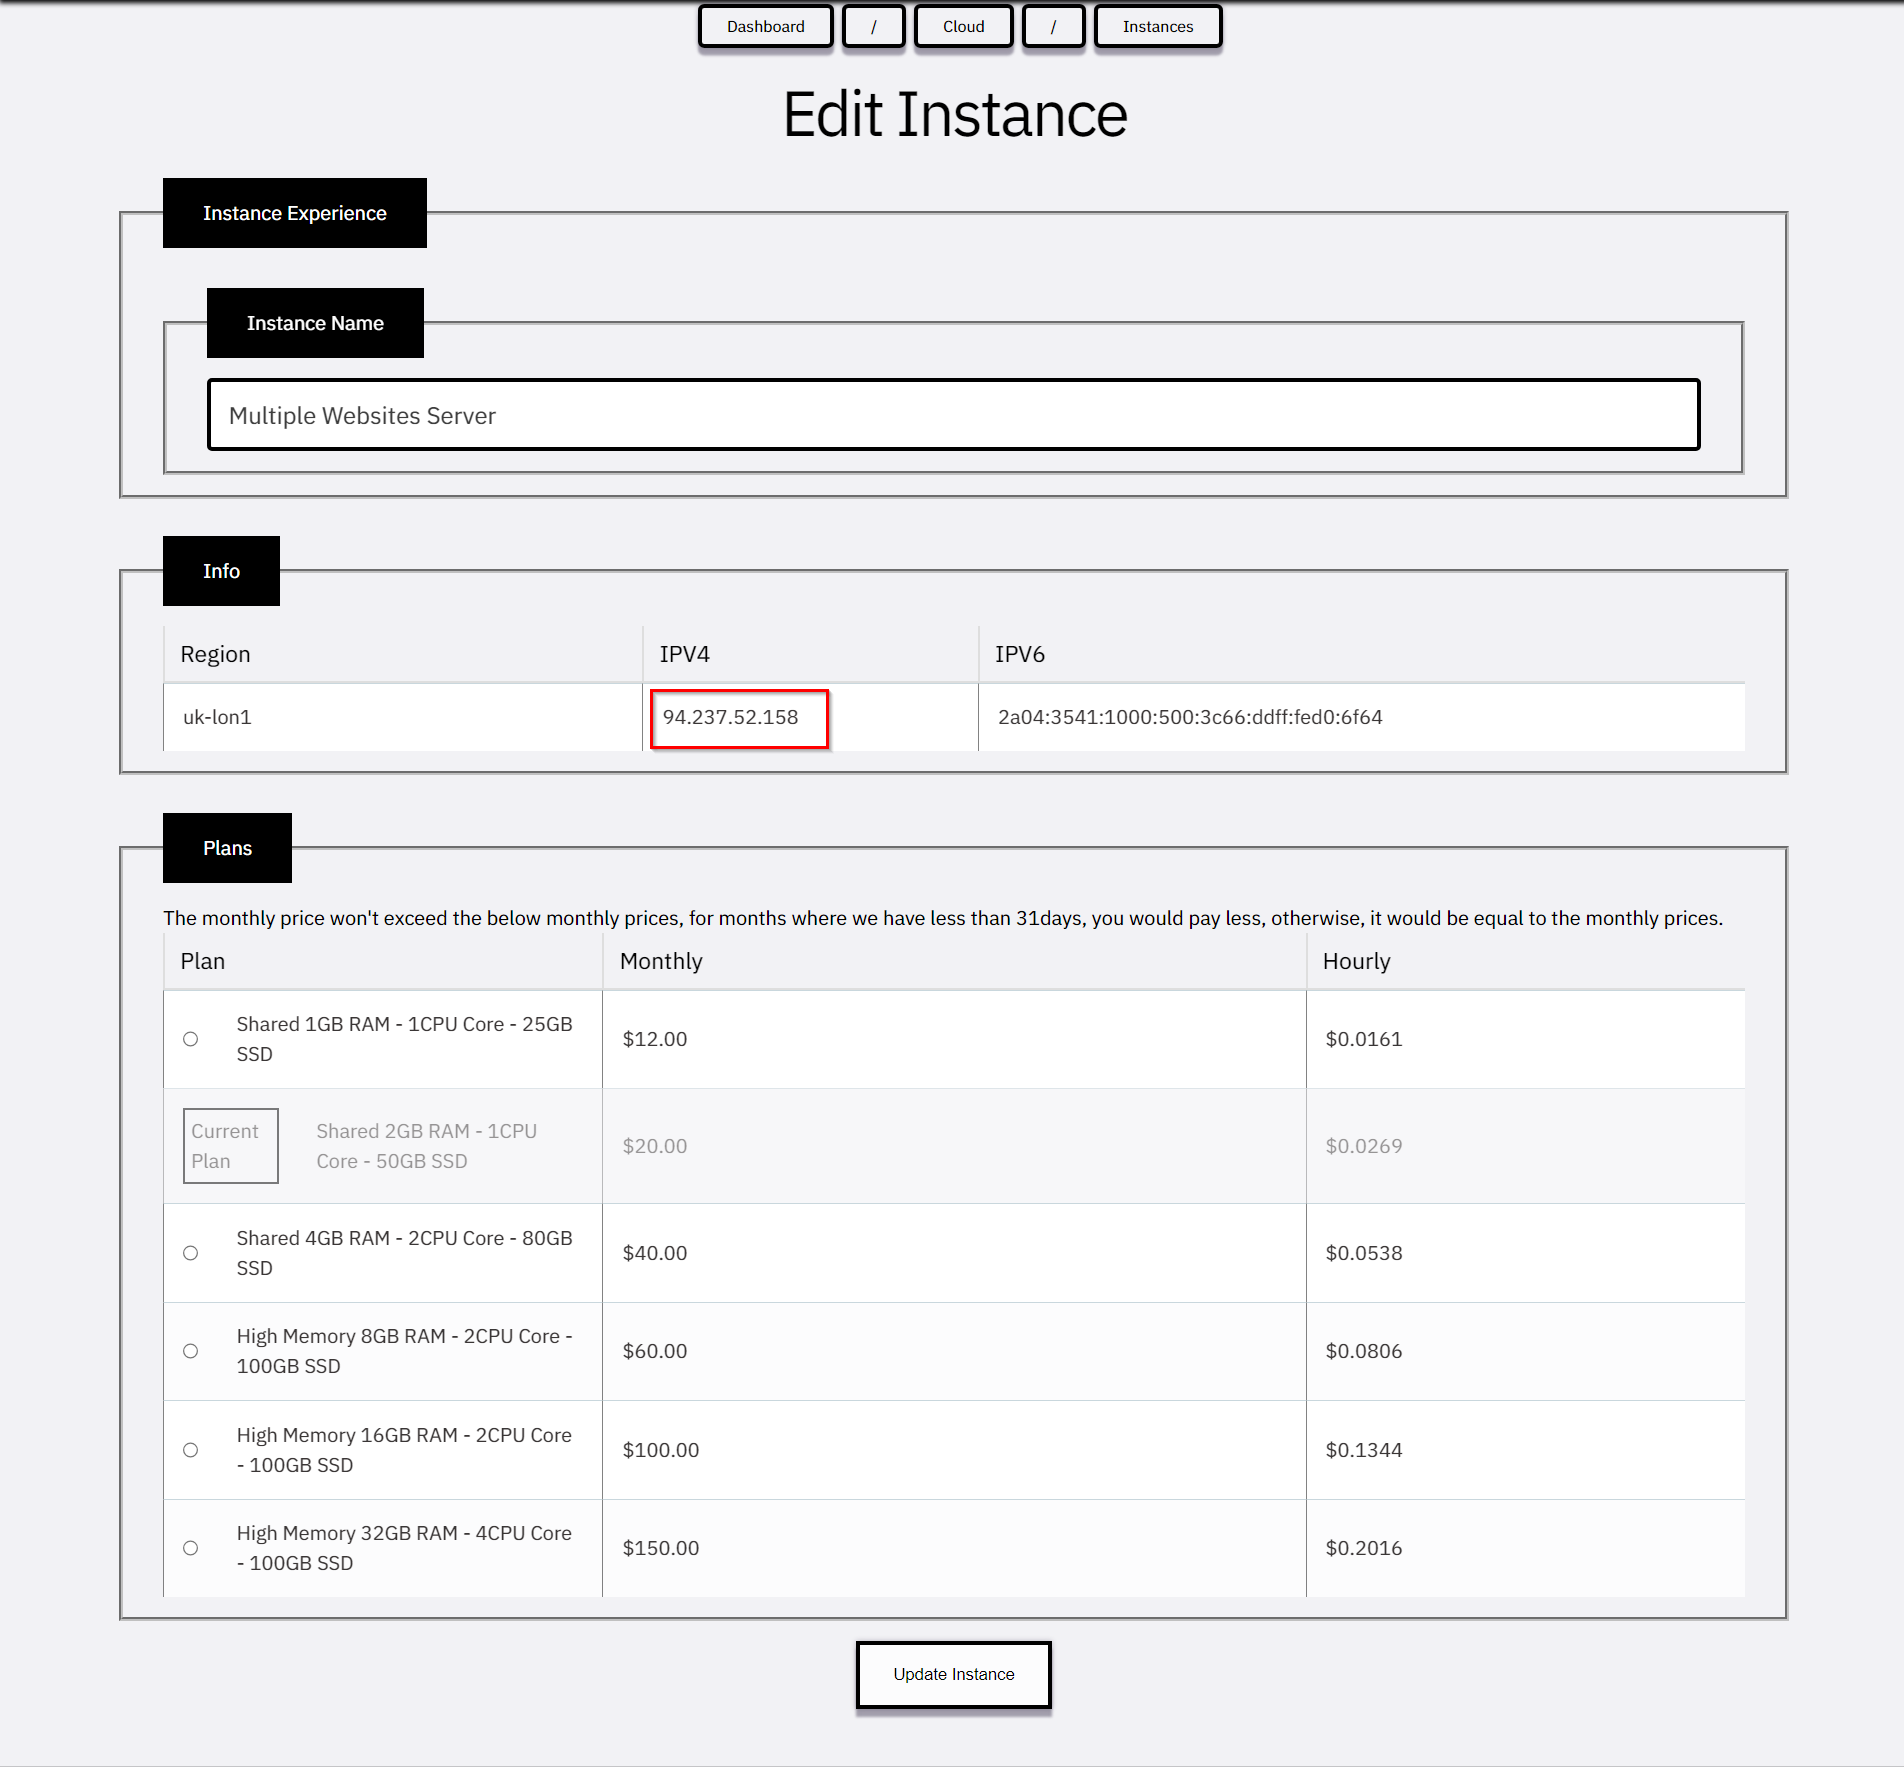 Edit Instance Page